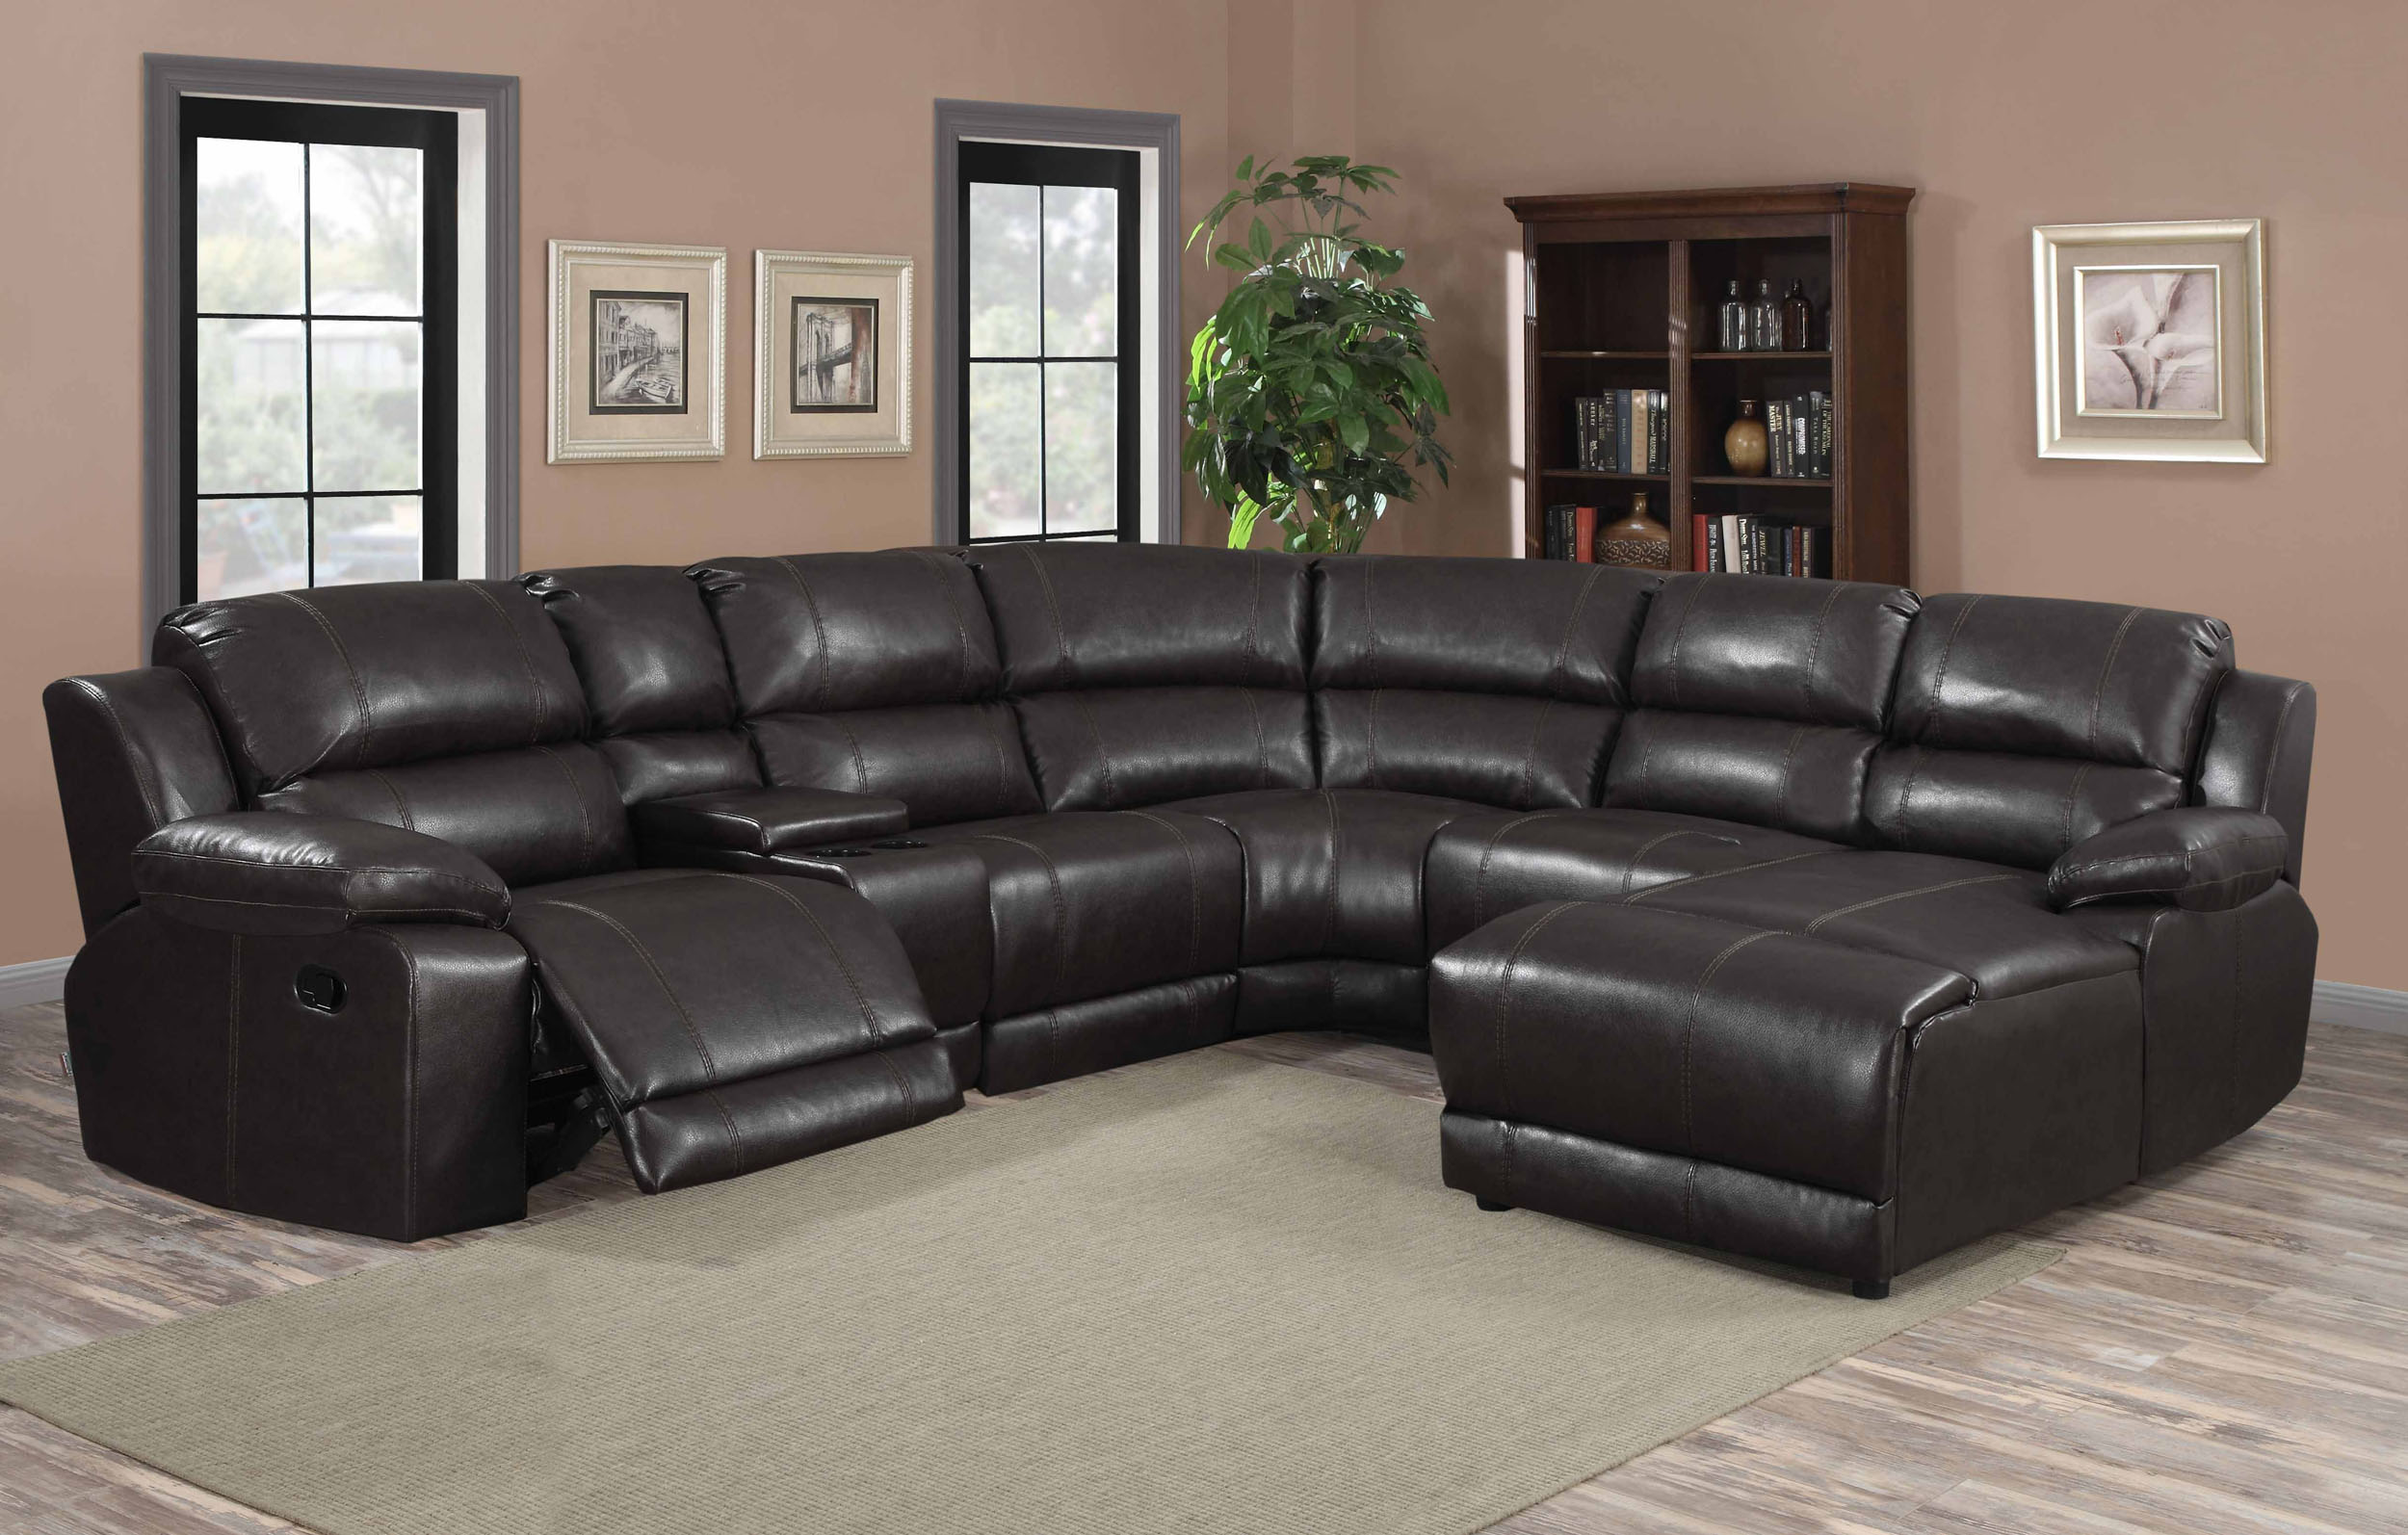 212 Charcoal P/U Motion Sectional With Lounger $1995